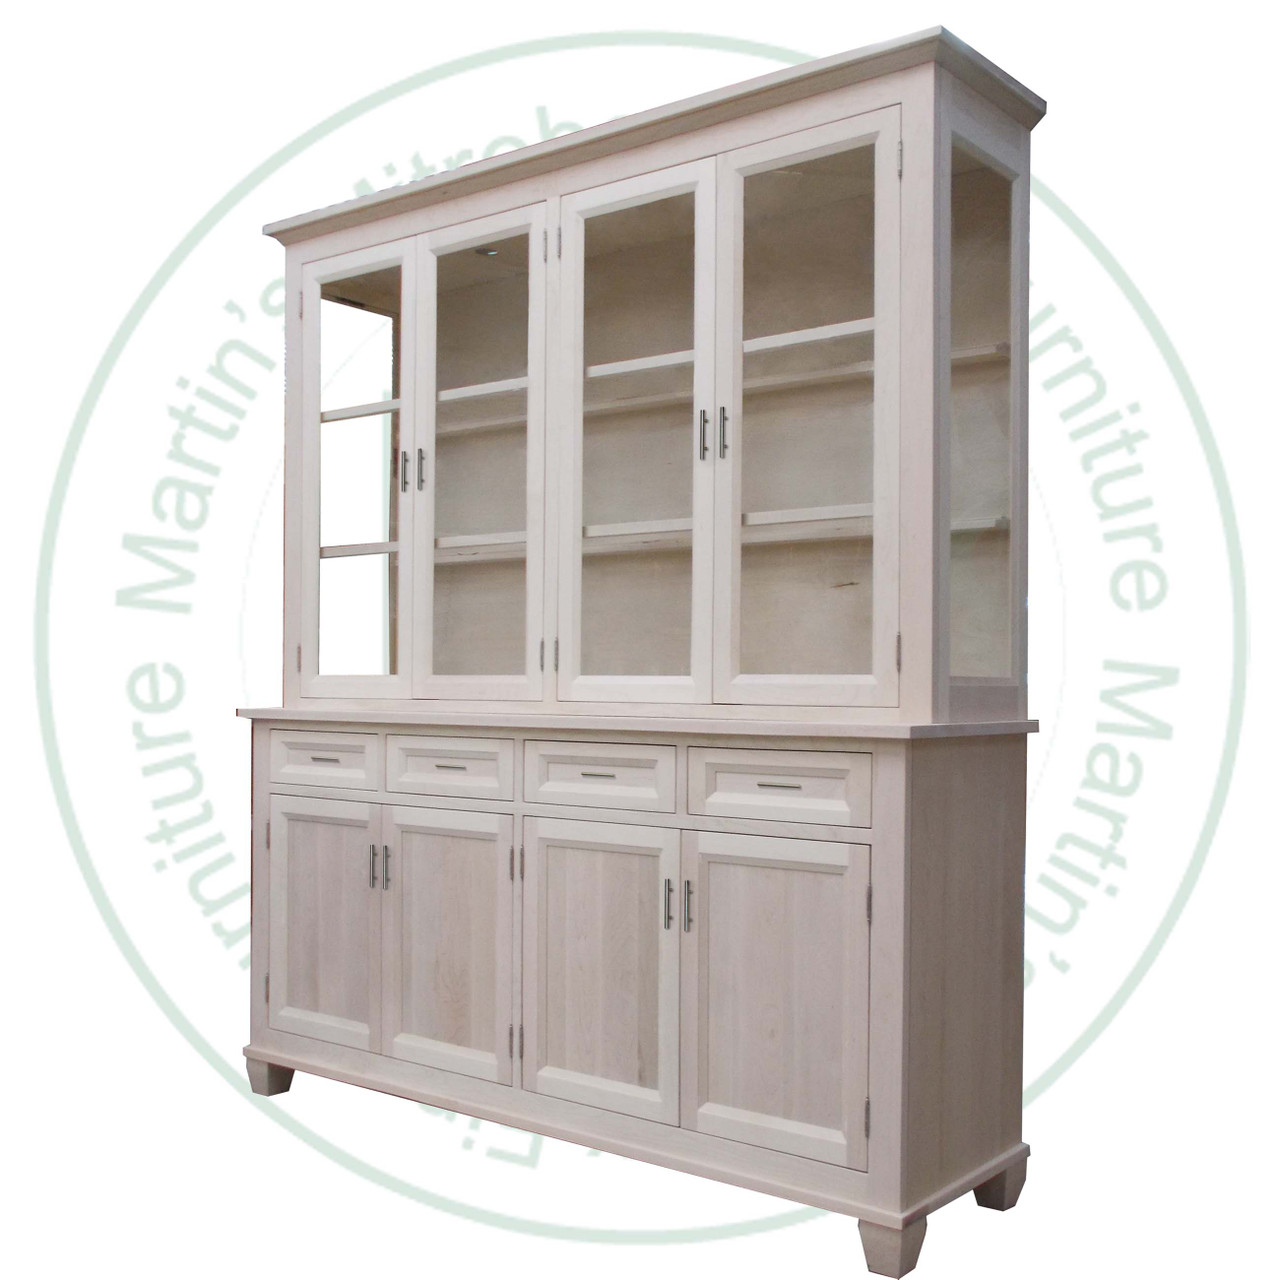 Maple Algonquin Hutch and Buffet 19'' Deep x 72'' Wide x 82'' High